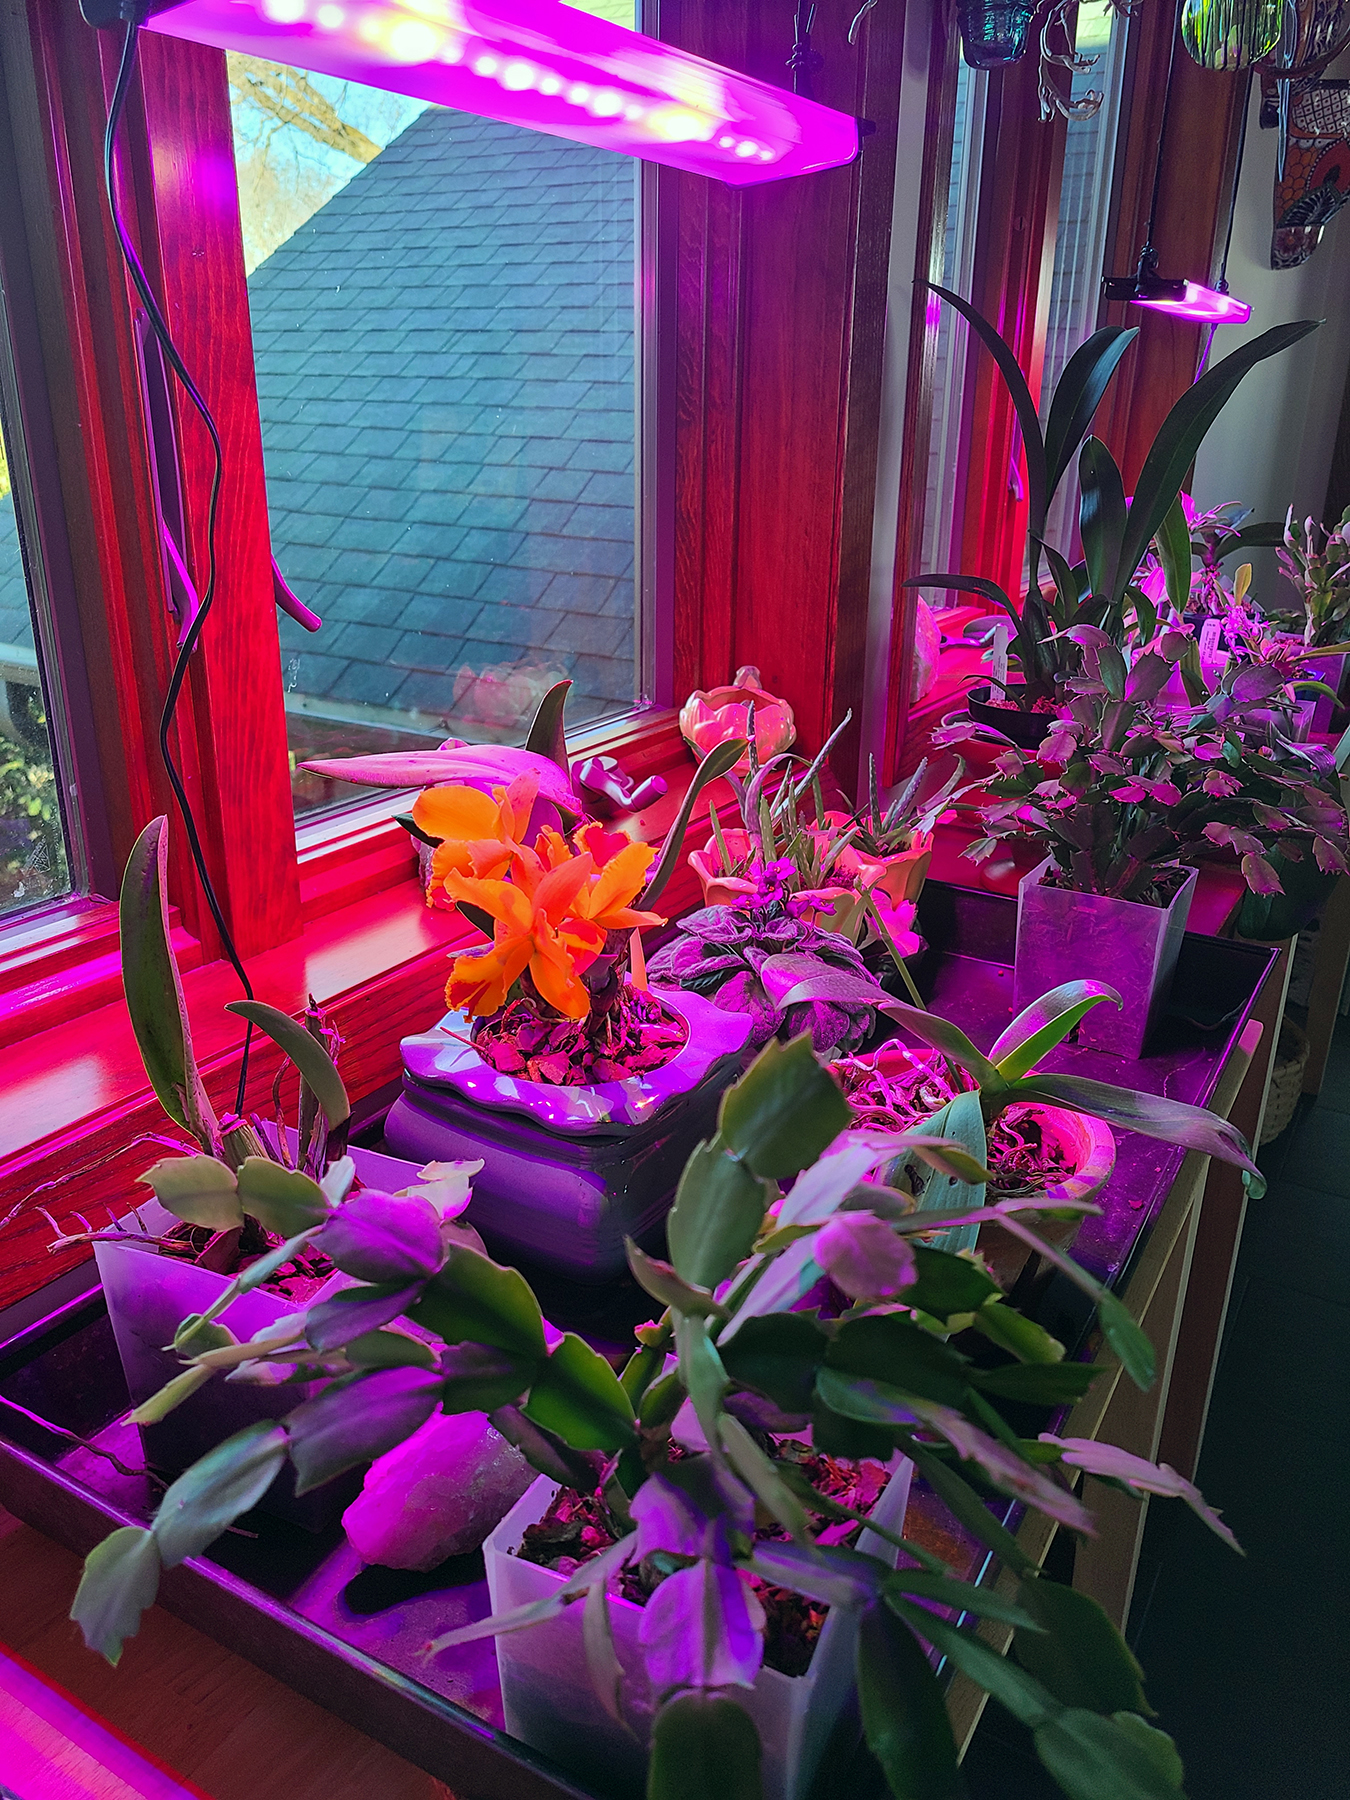 How Can Blue and Red Light Help Indoor Plants?